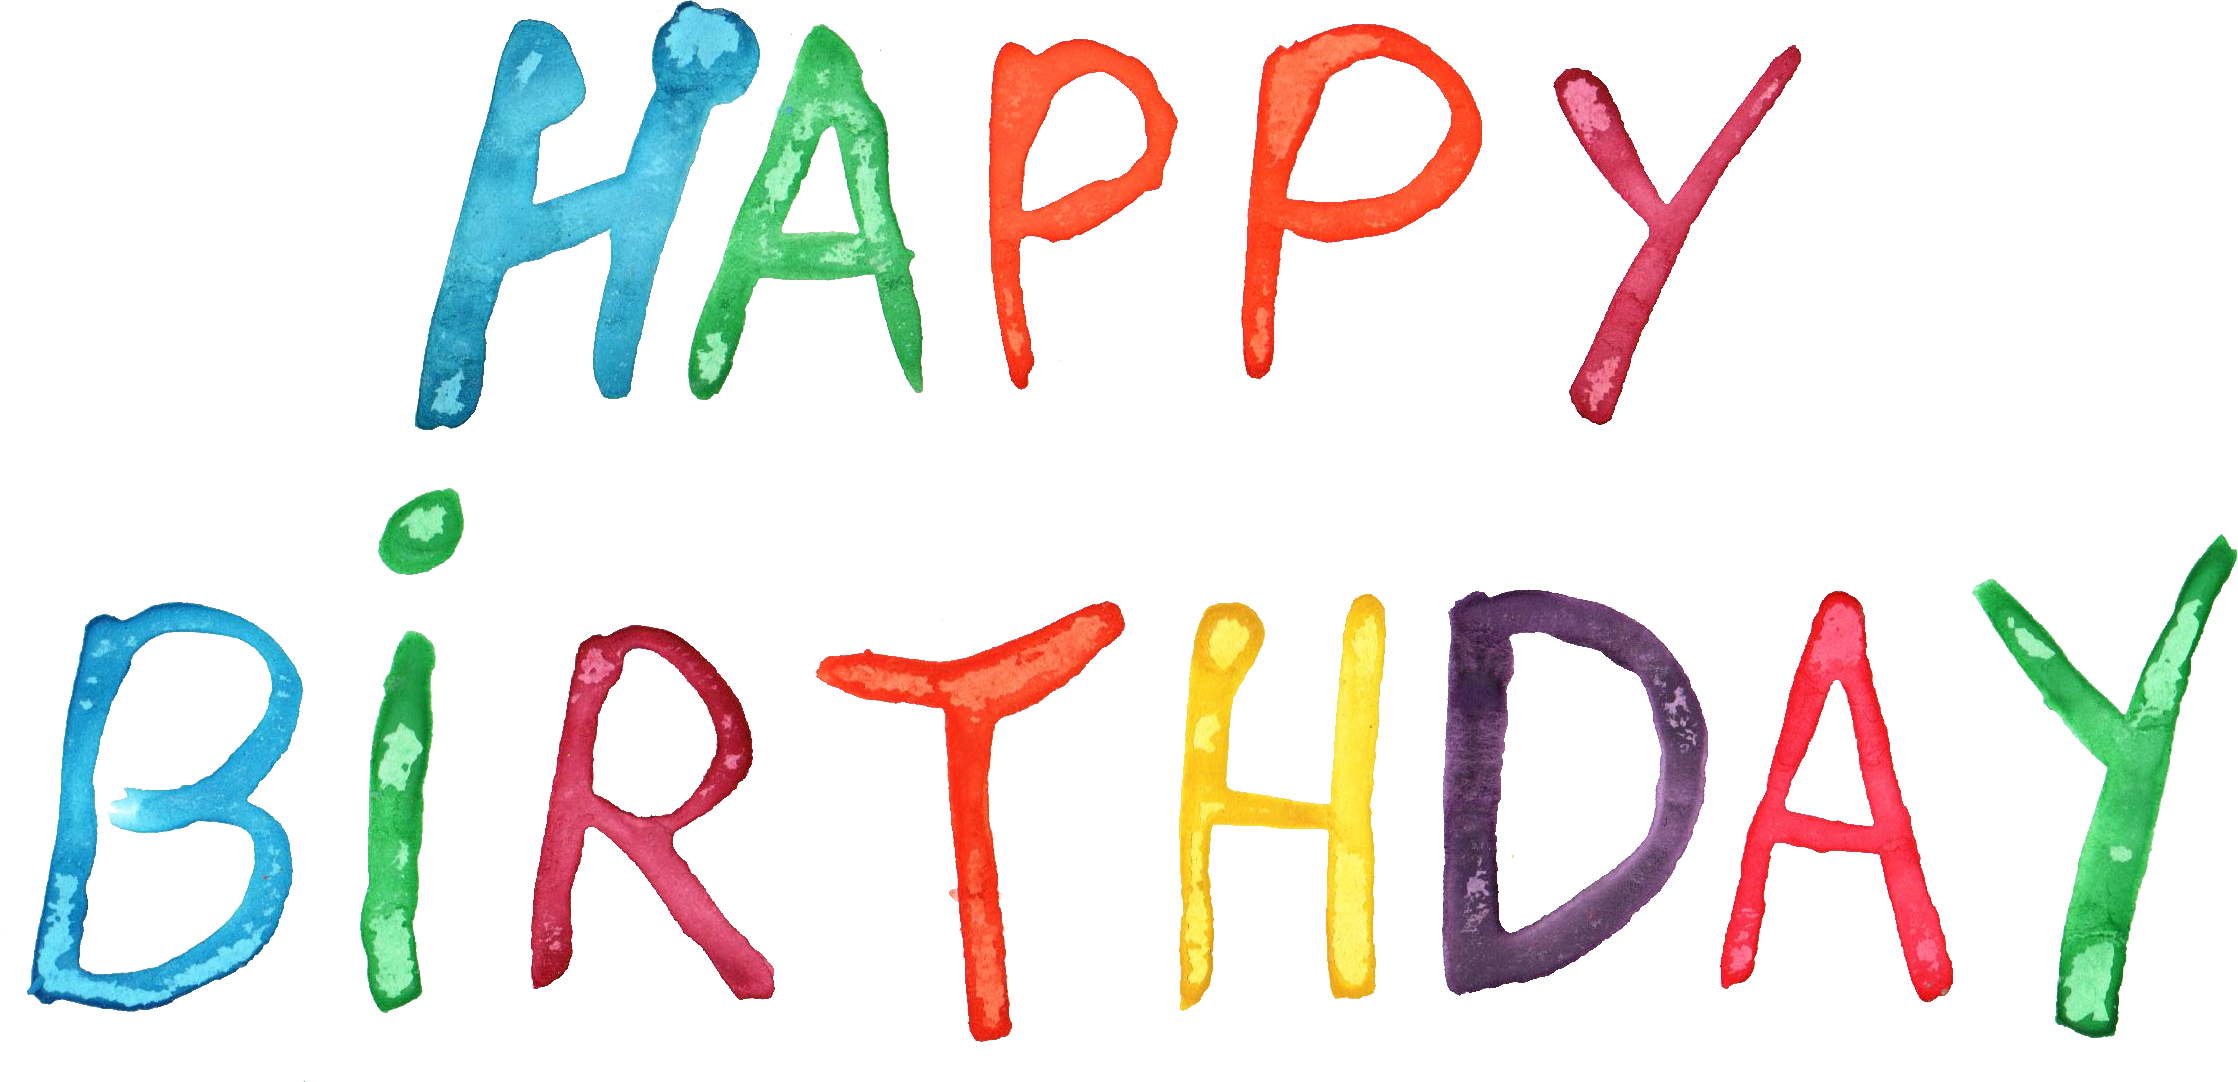 Free Download - Happy Birthday Image Png (2238x1082)